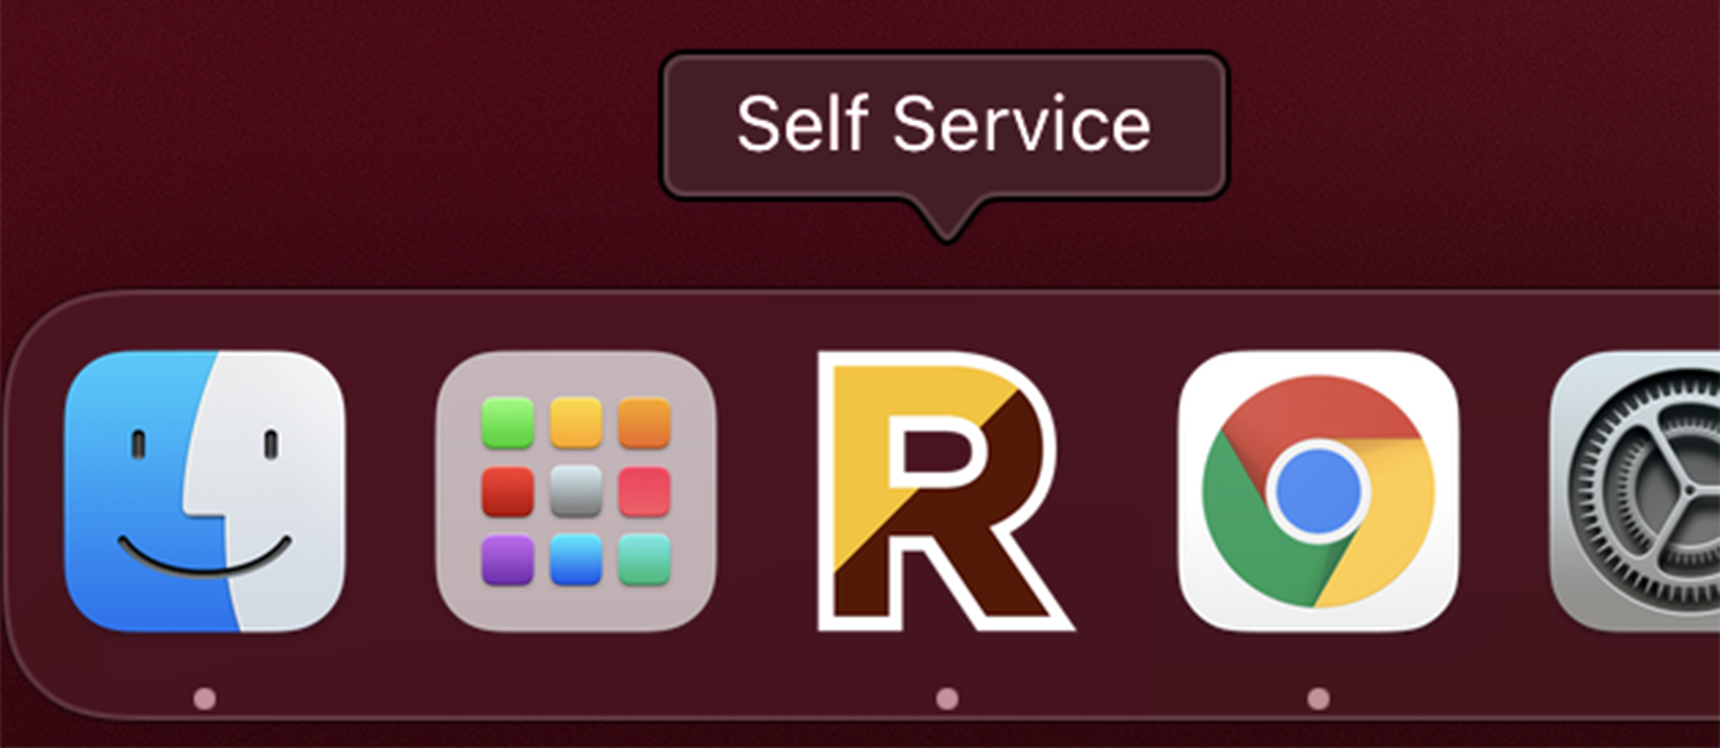 screenshot of the new Self Service icon on a mac